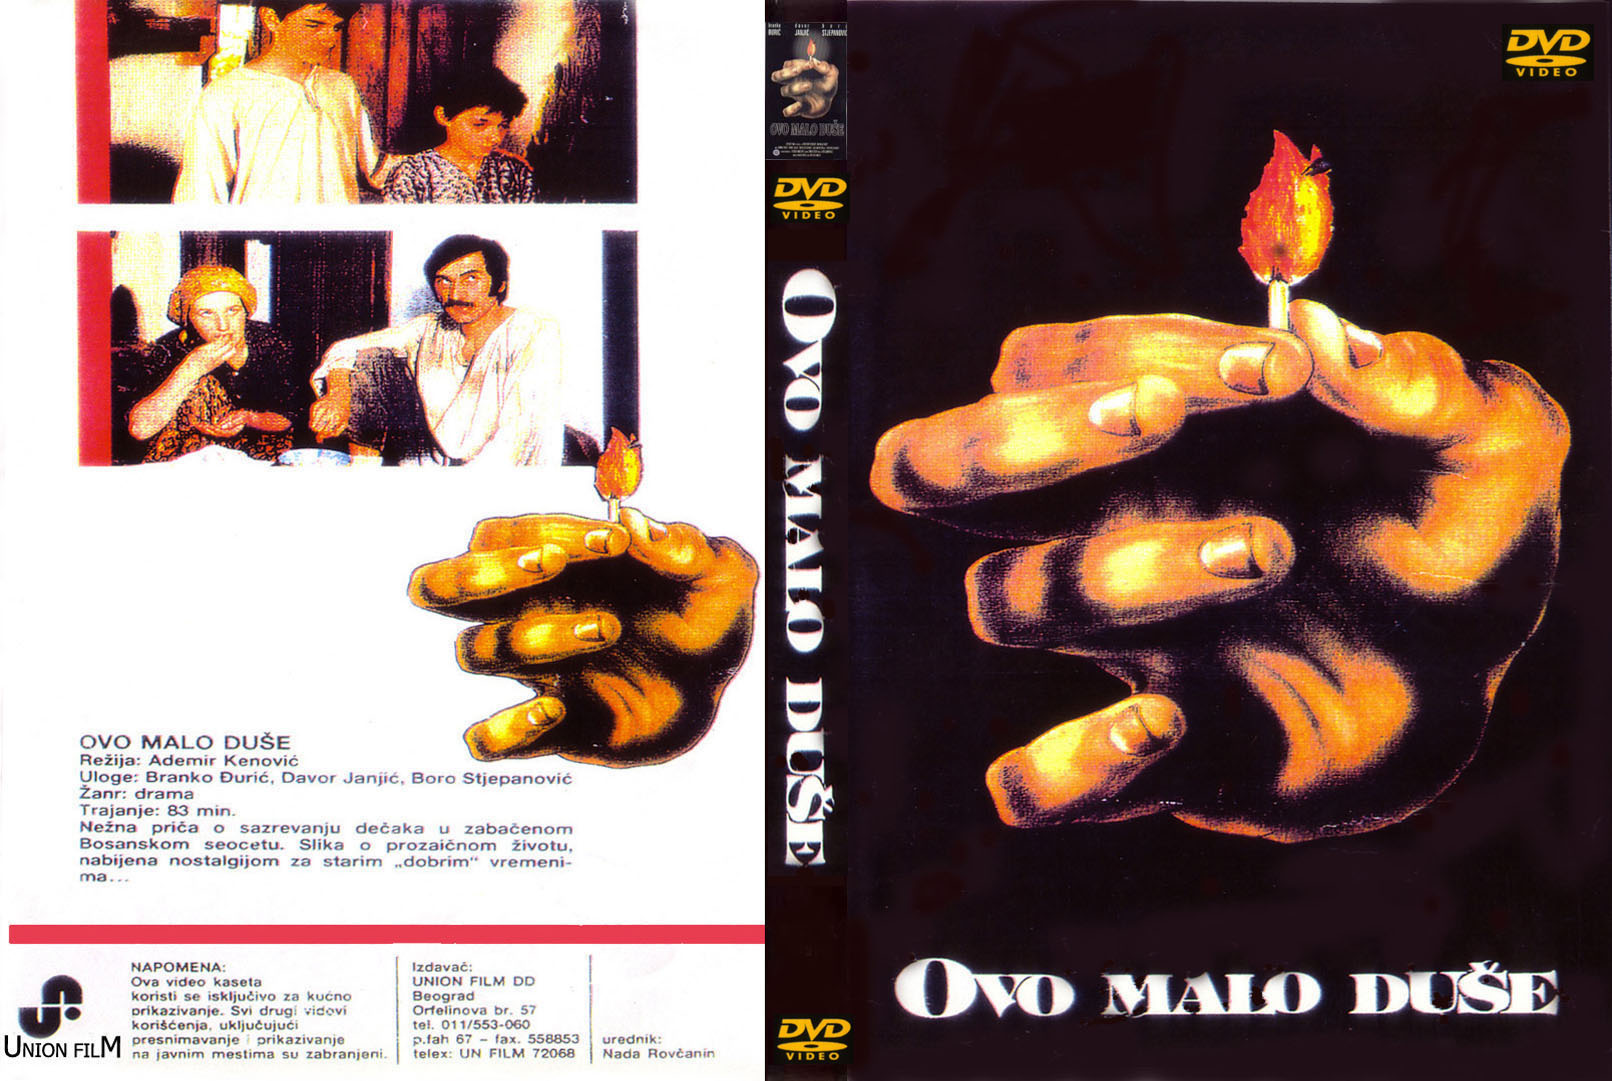 Click to view full size image -  DVD Cover - O - ovo_malo_duse_dvd - ovo_malo_duse_dvd.jpg